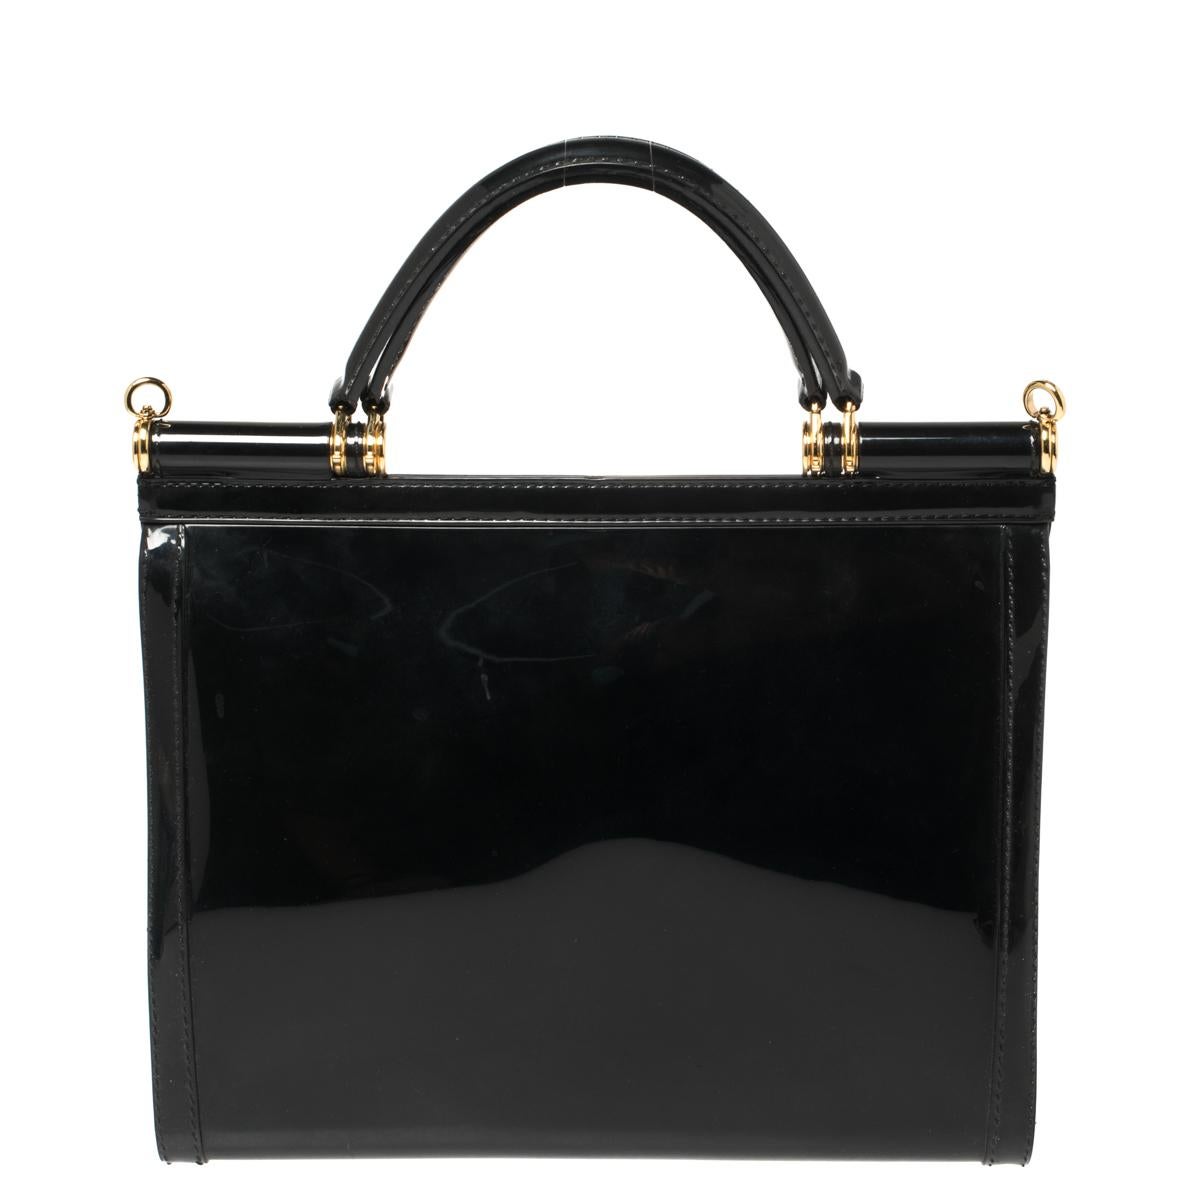 This beautiful black colored Miss Sicily bag from Dolce & Gabbana has a structured design. Crafted from rubber, the bag features a top handle, an adjustable detachable shoulder strap printed with: L'amore È Bellezza, and the brand label at the